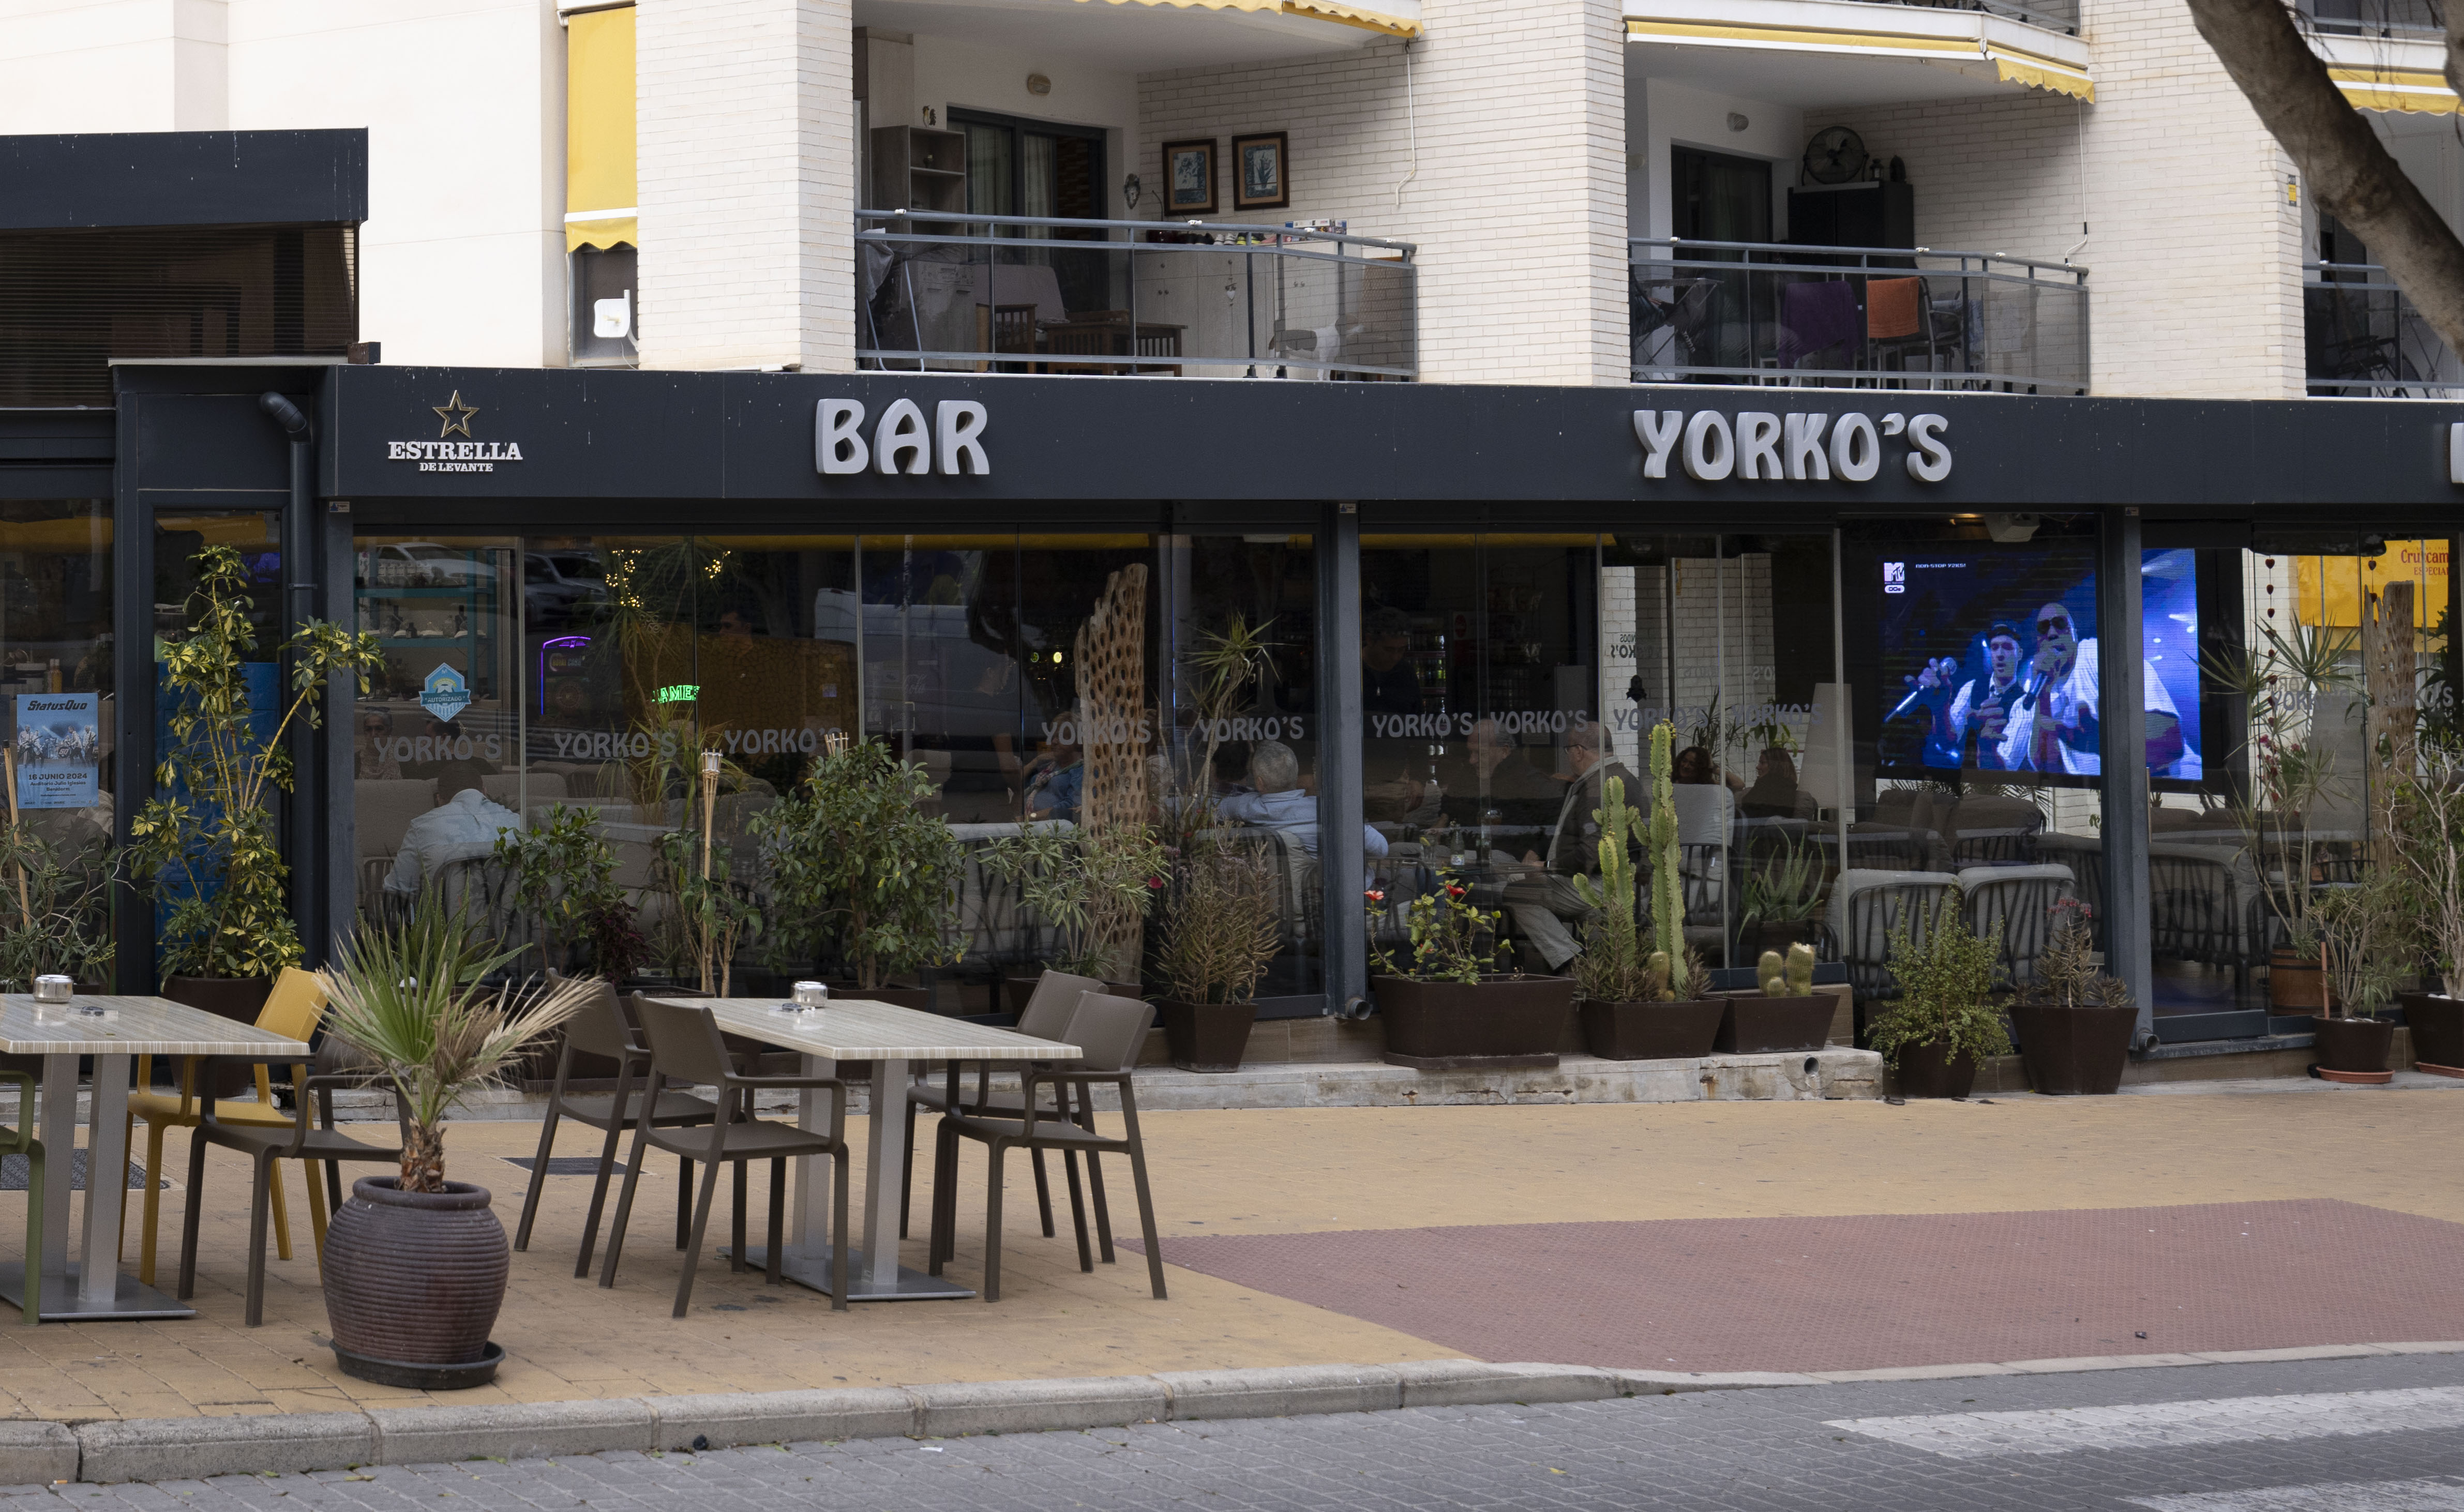 The Yorko's bar located opposite Maxim's apartment building, which is run by Eastern Europeans and frequented by many Russians and Ukrainians